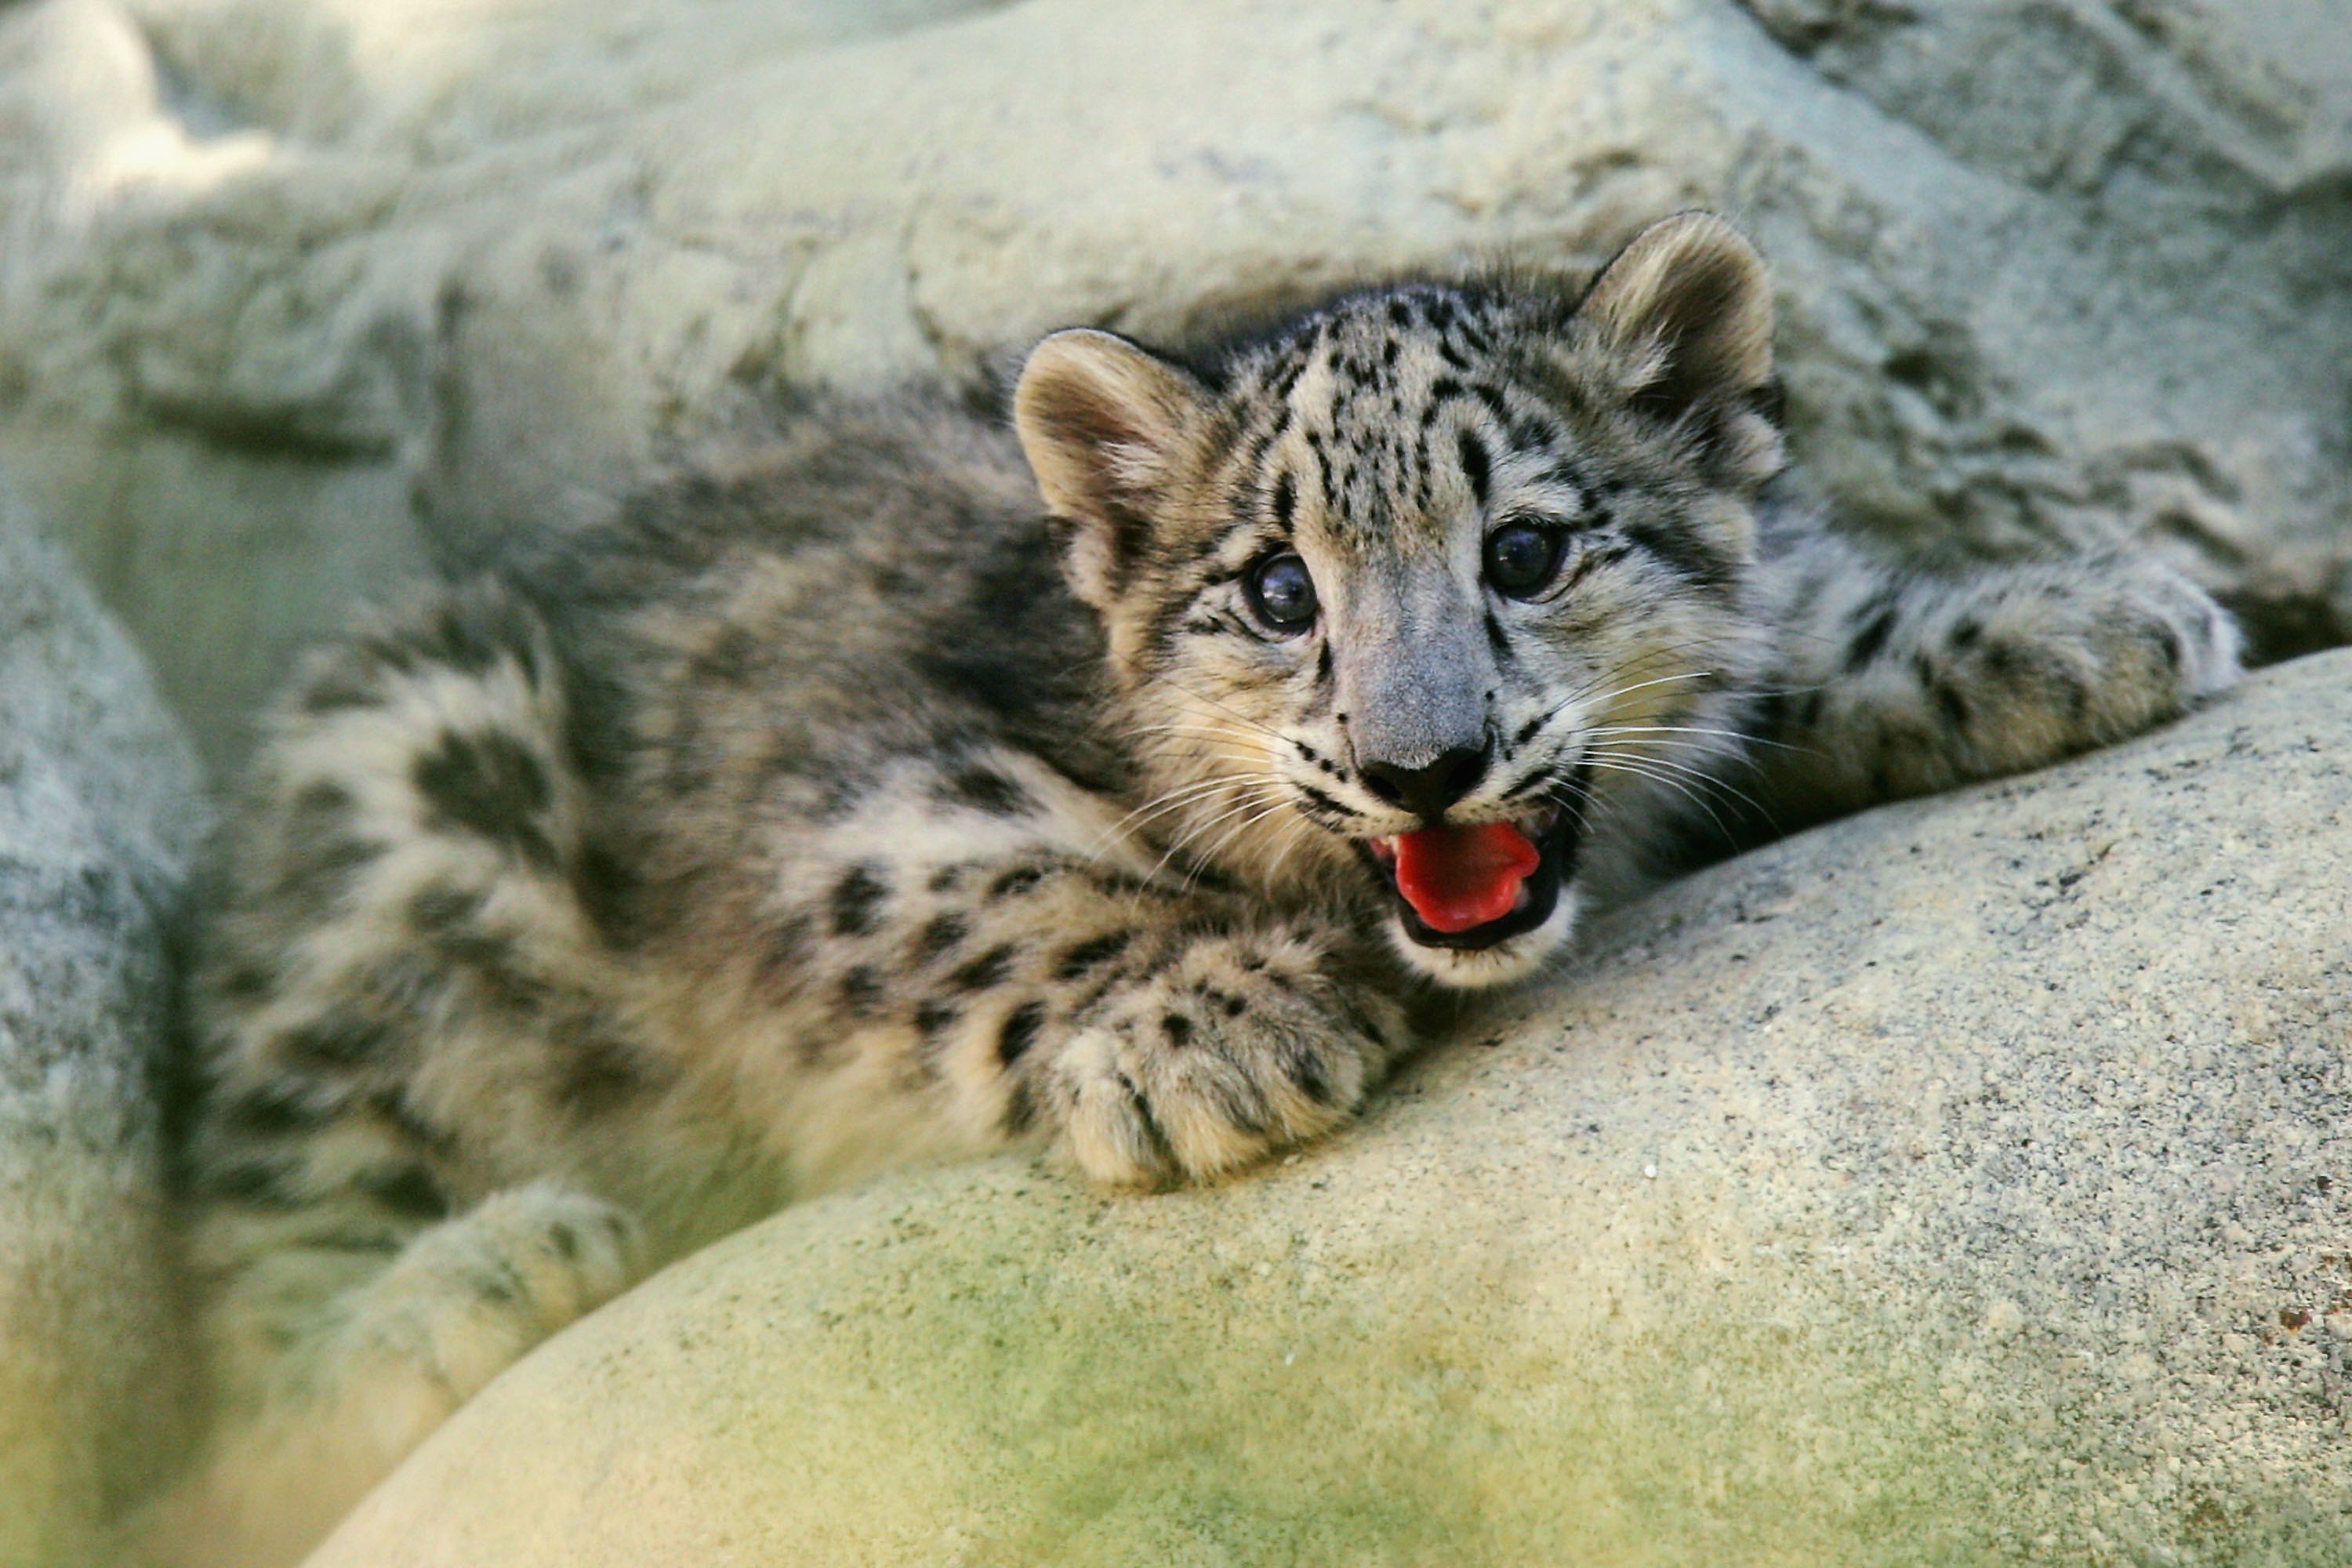 An endangered snow leopard kitten at the Los Angeles Zoo on Sept.  7, 2006 (David McNew—Getty Images)